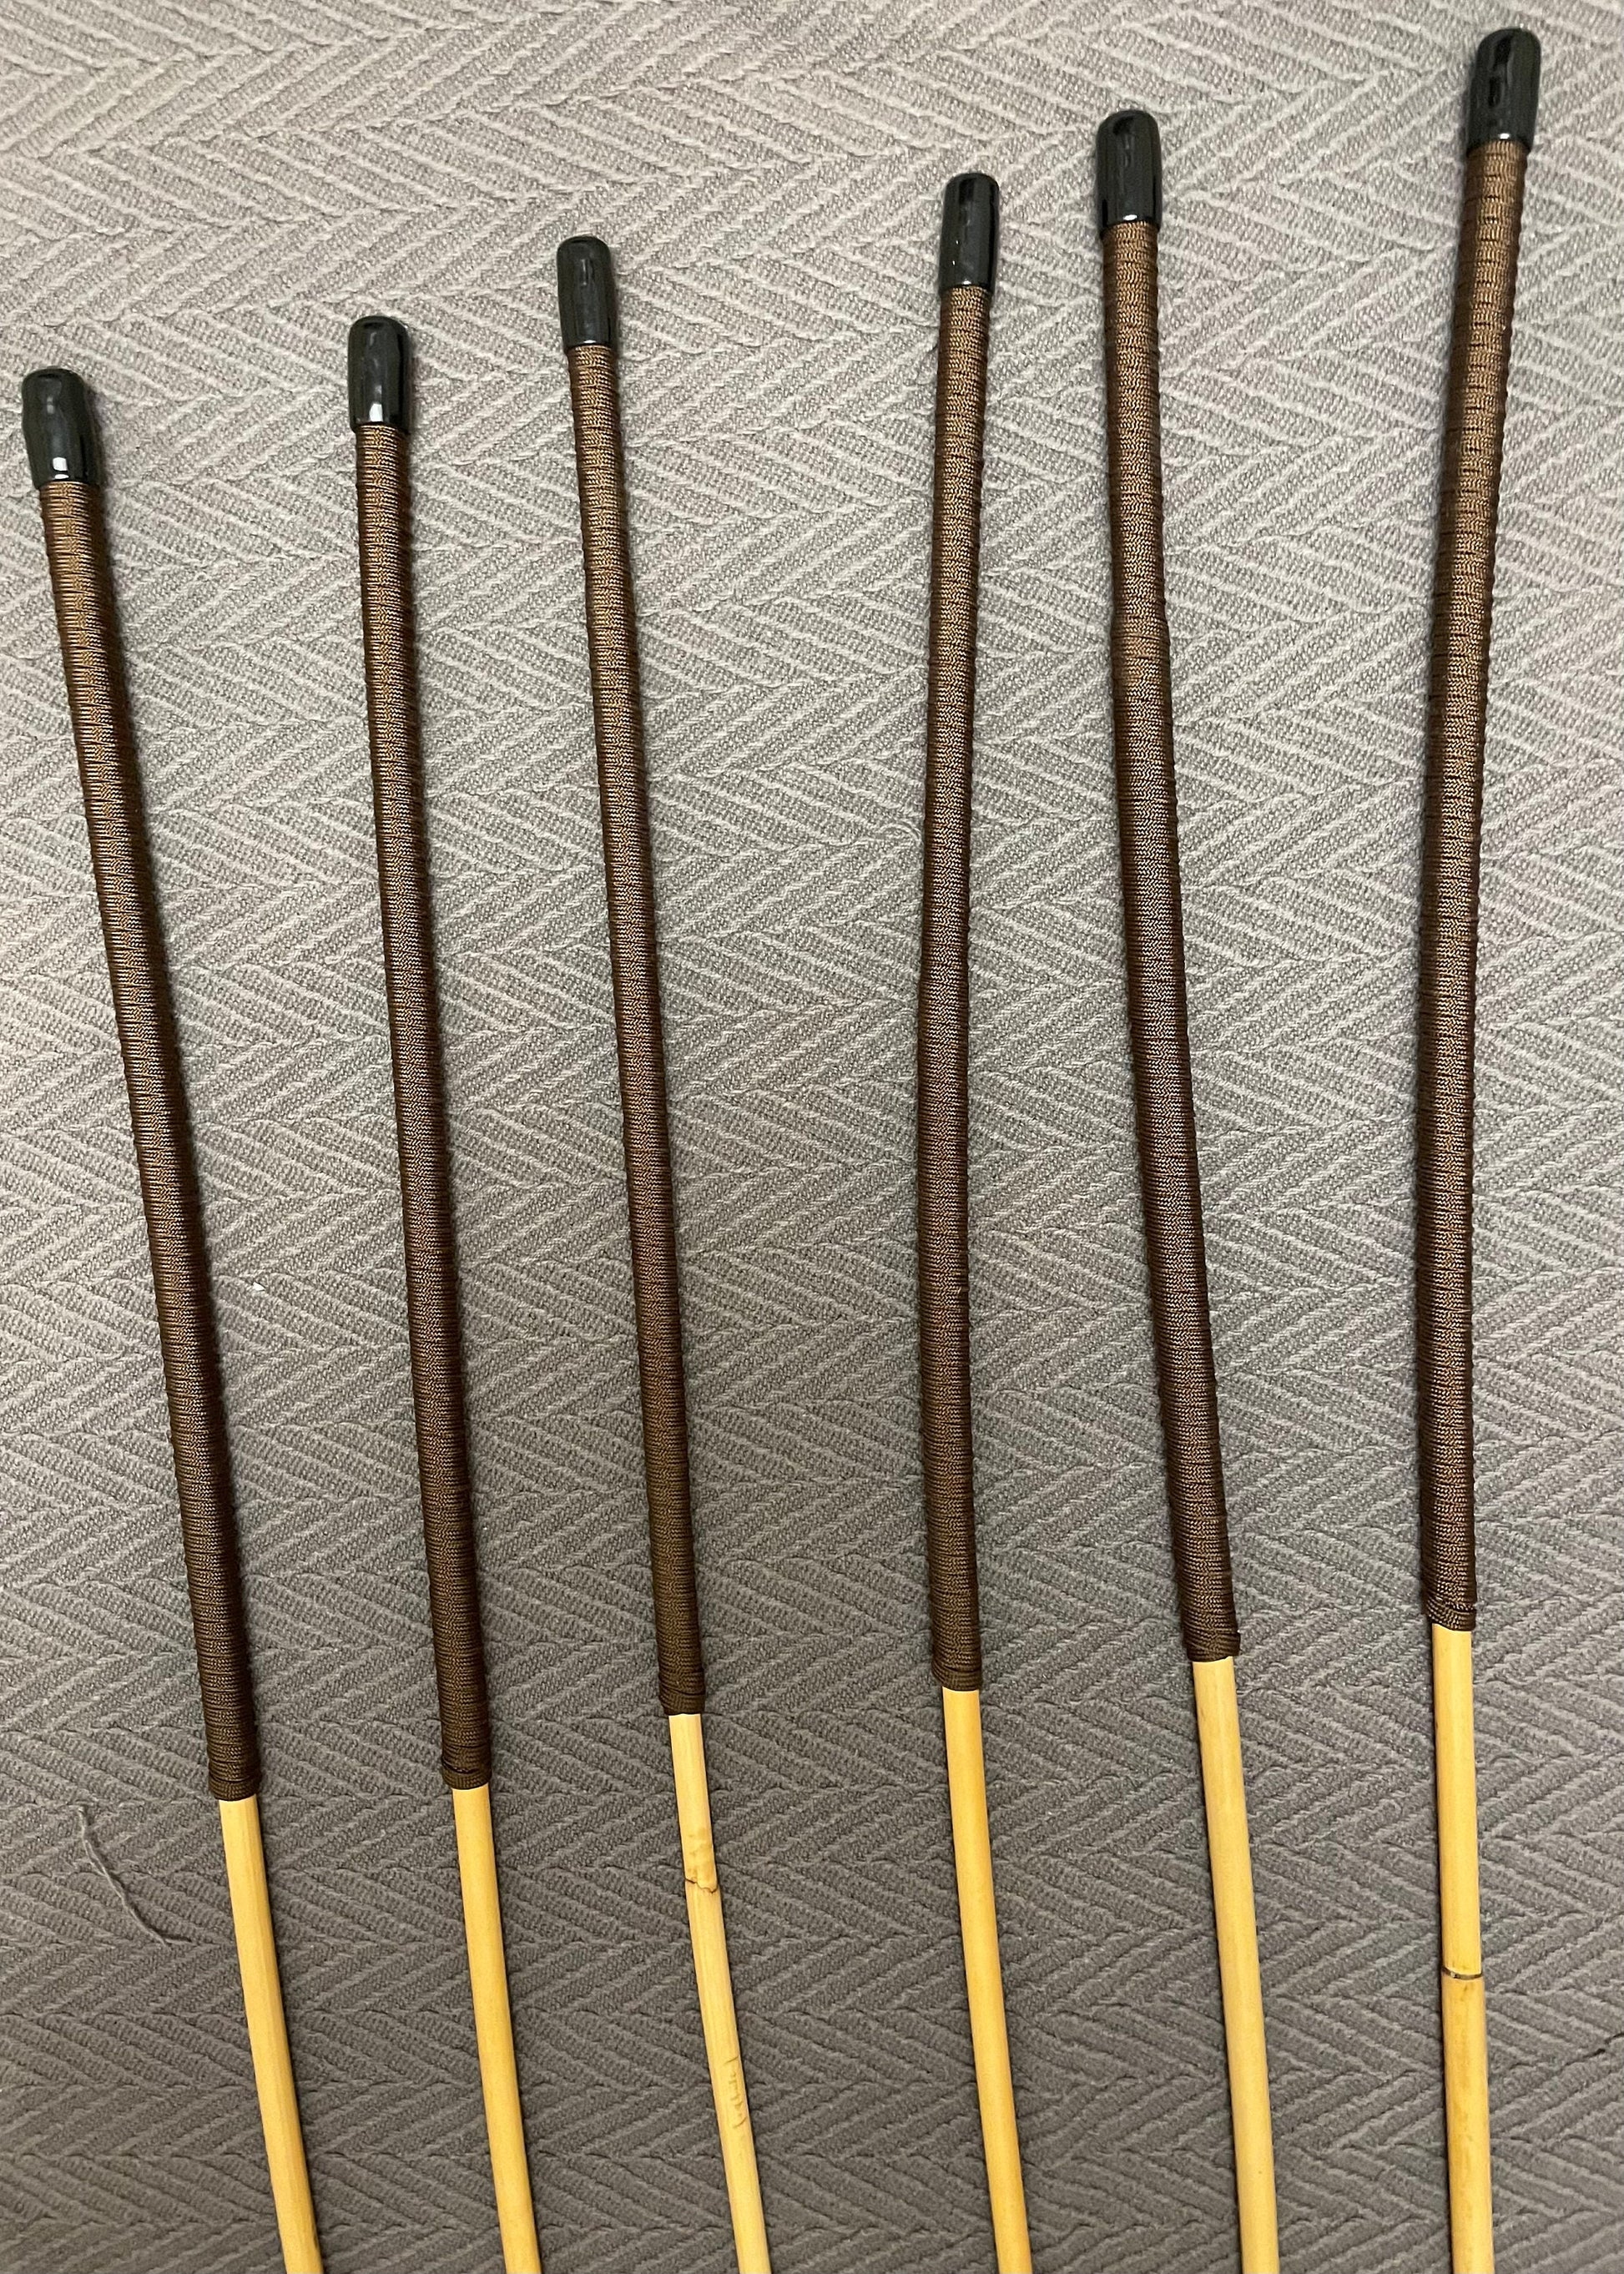 The Stinger Six Set of 6 Whippy Thin Swishy Dragon Canes  with Brown Paracord Handles - 95 cms Length